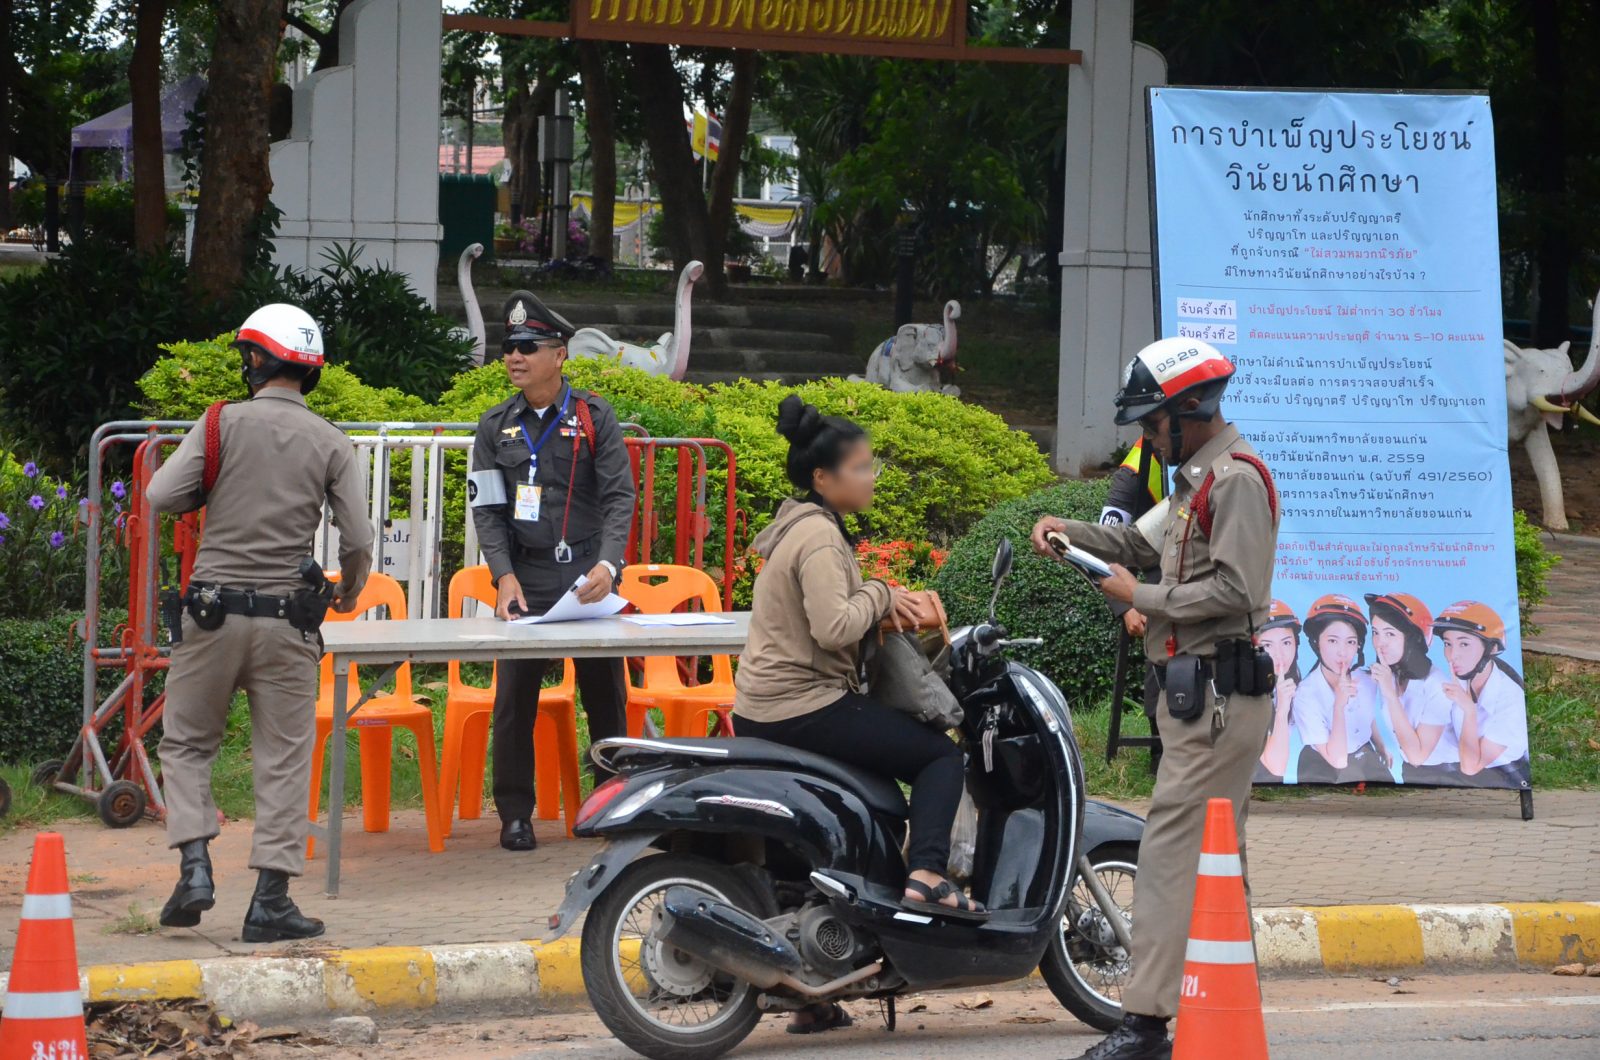 KKU raises students’ awareness of traffic rules and manners reflecting national discipline